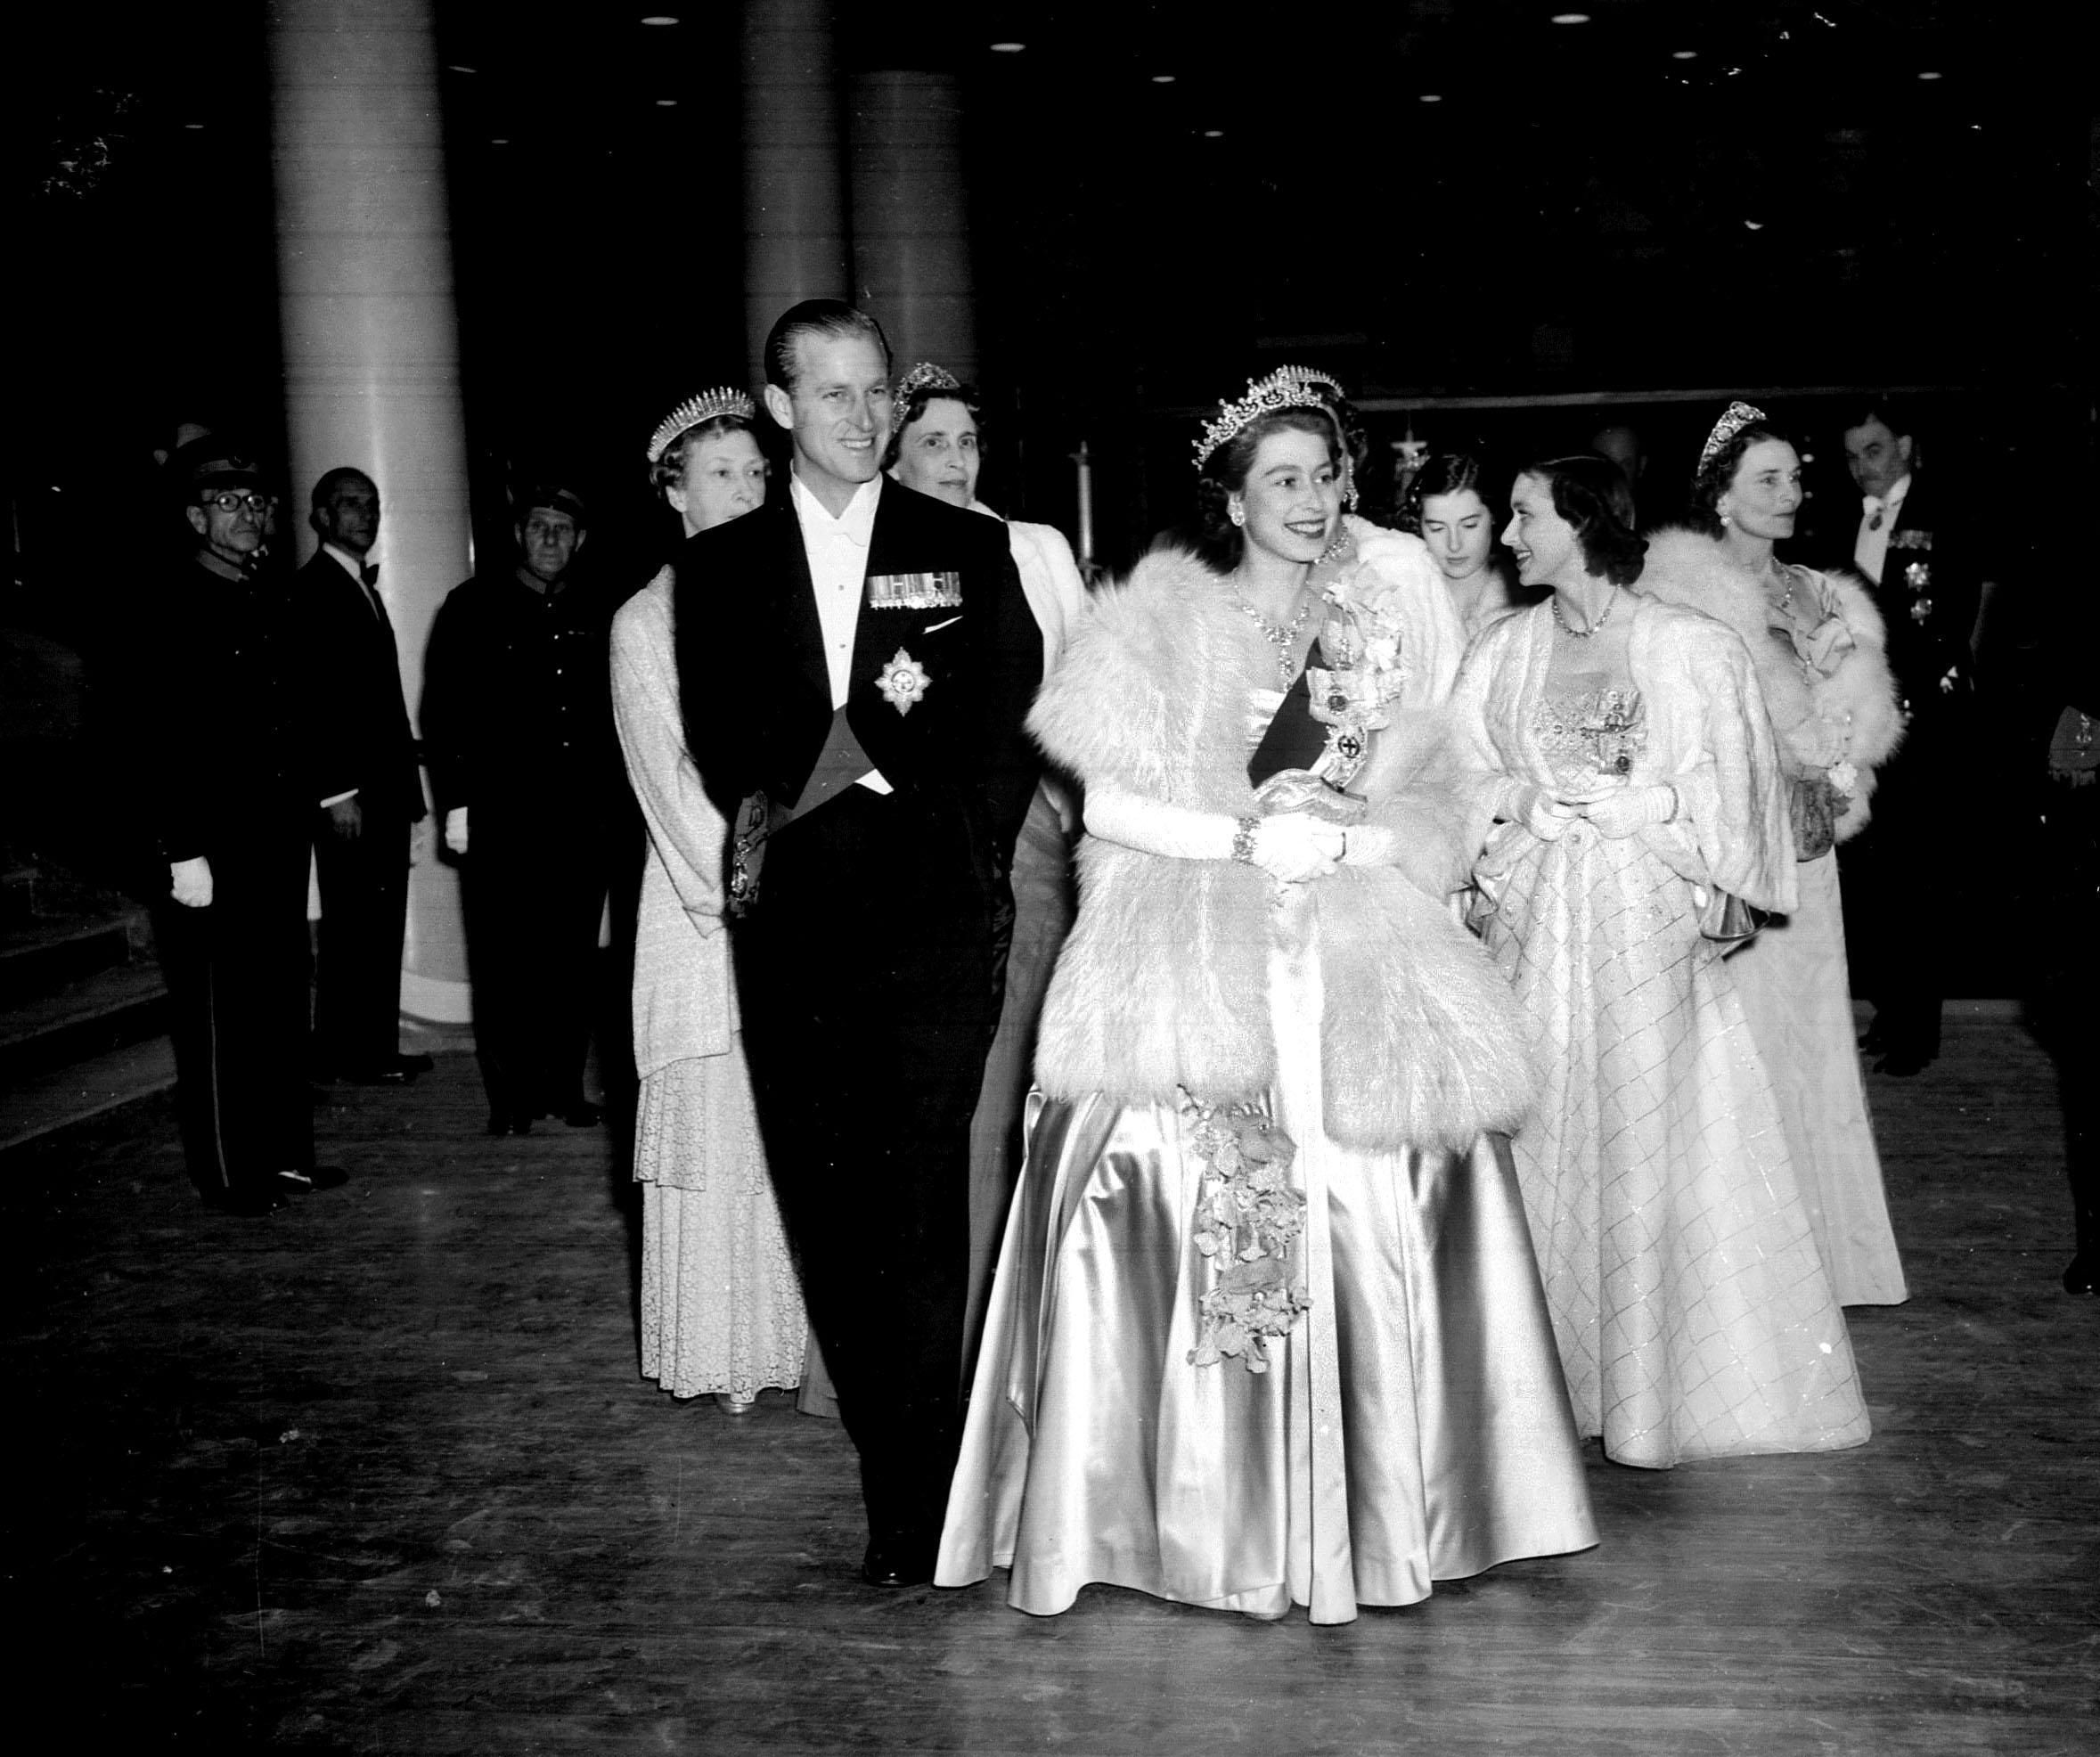 Princess Elizabeth and the Duke of Edinburgh lead the Royals as they attend the opening night of the Royal Festival Hall at the South Bank, London